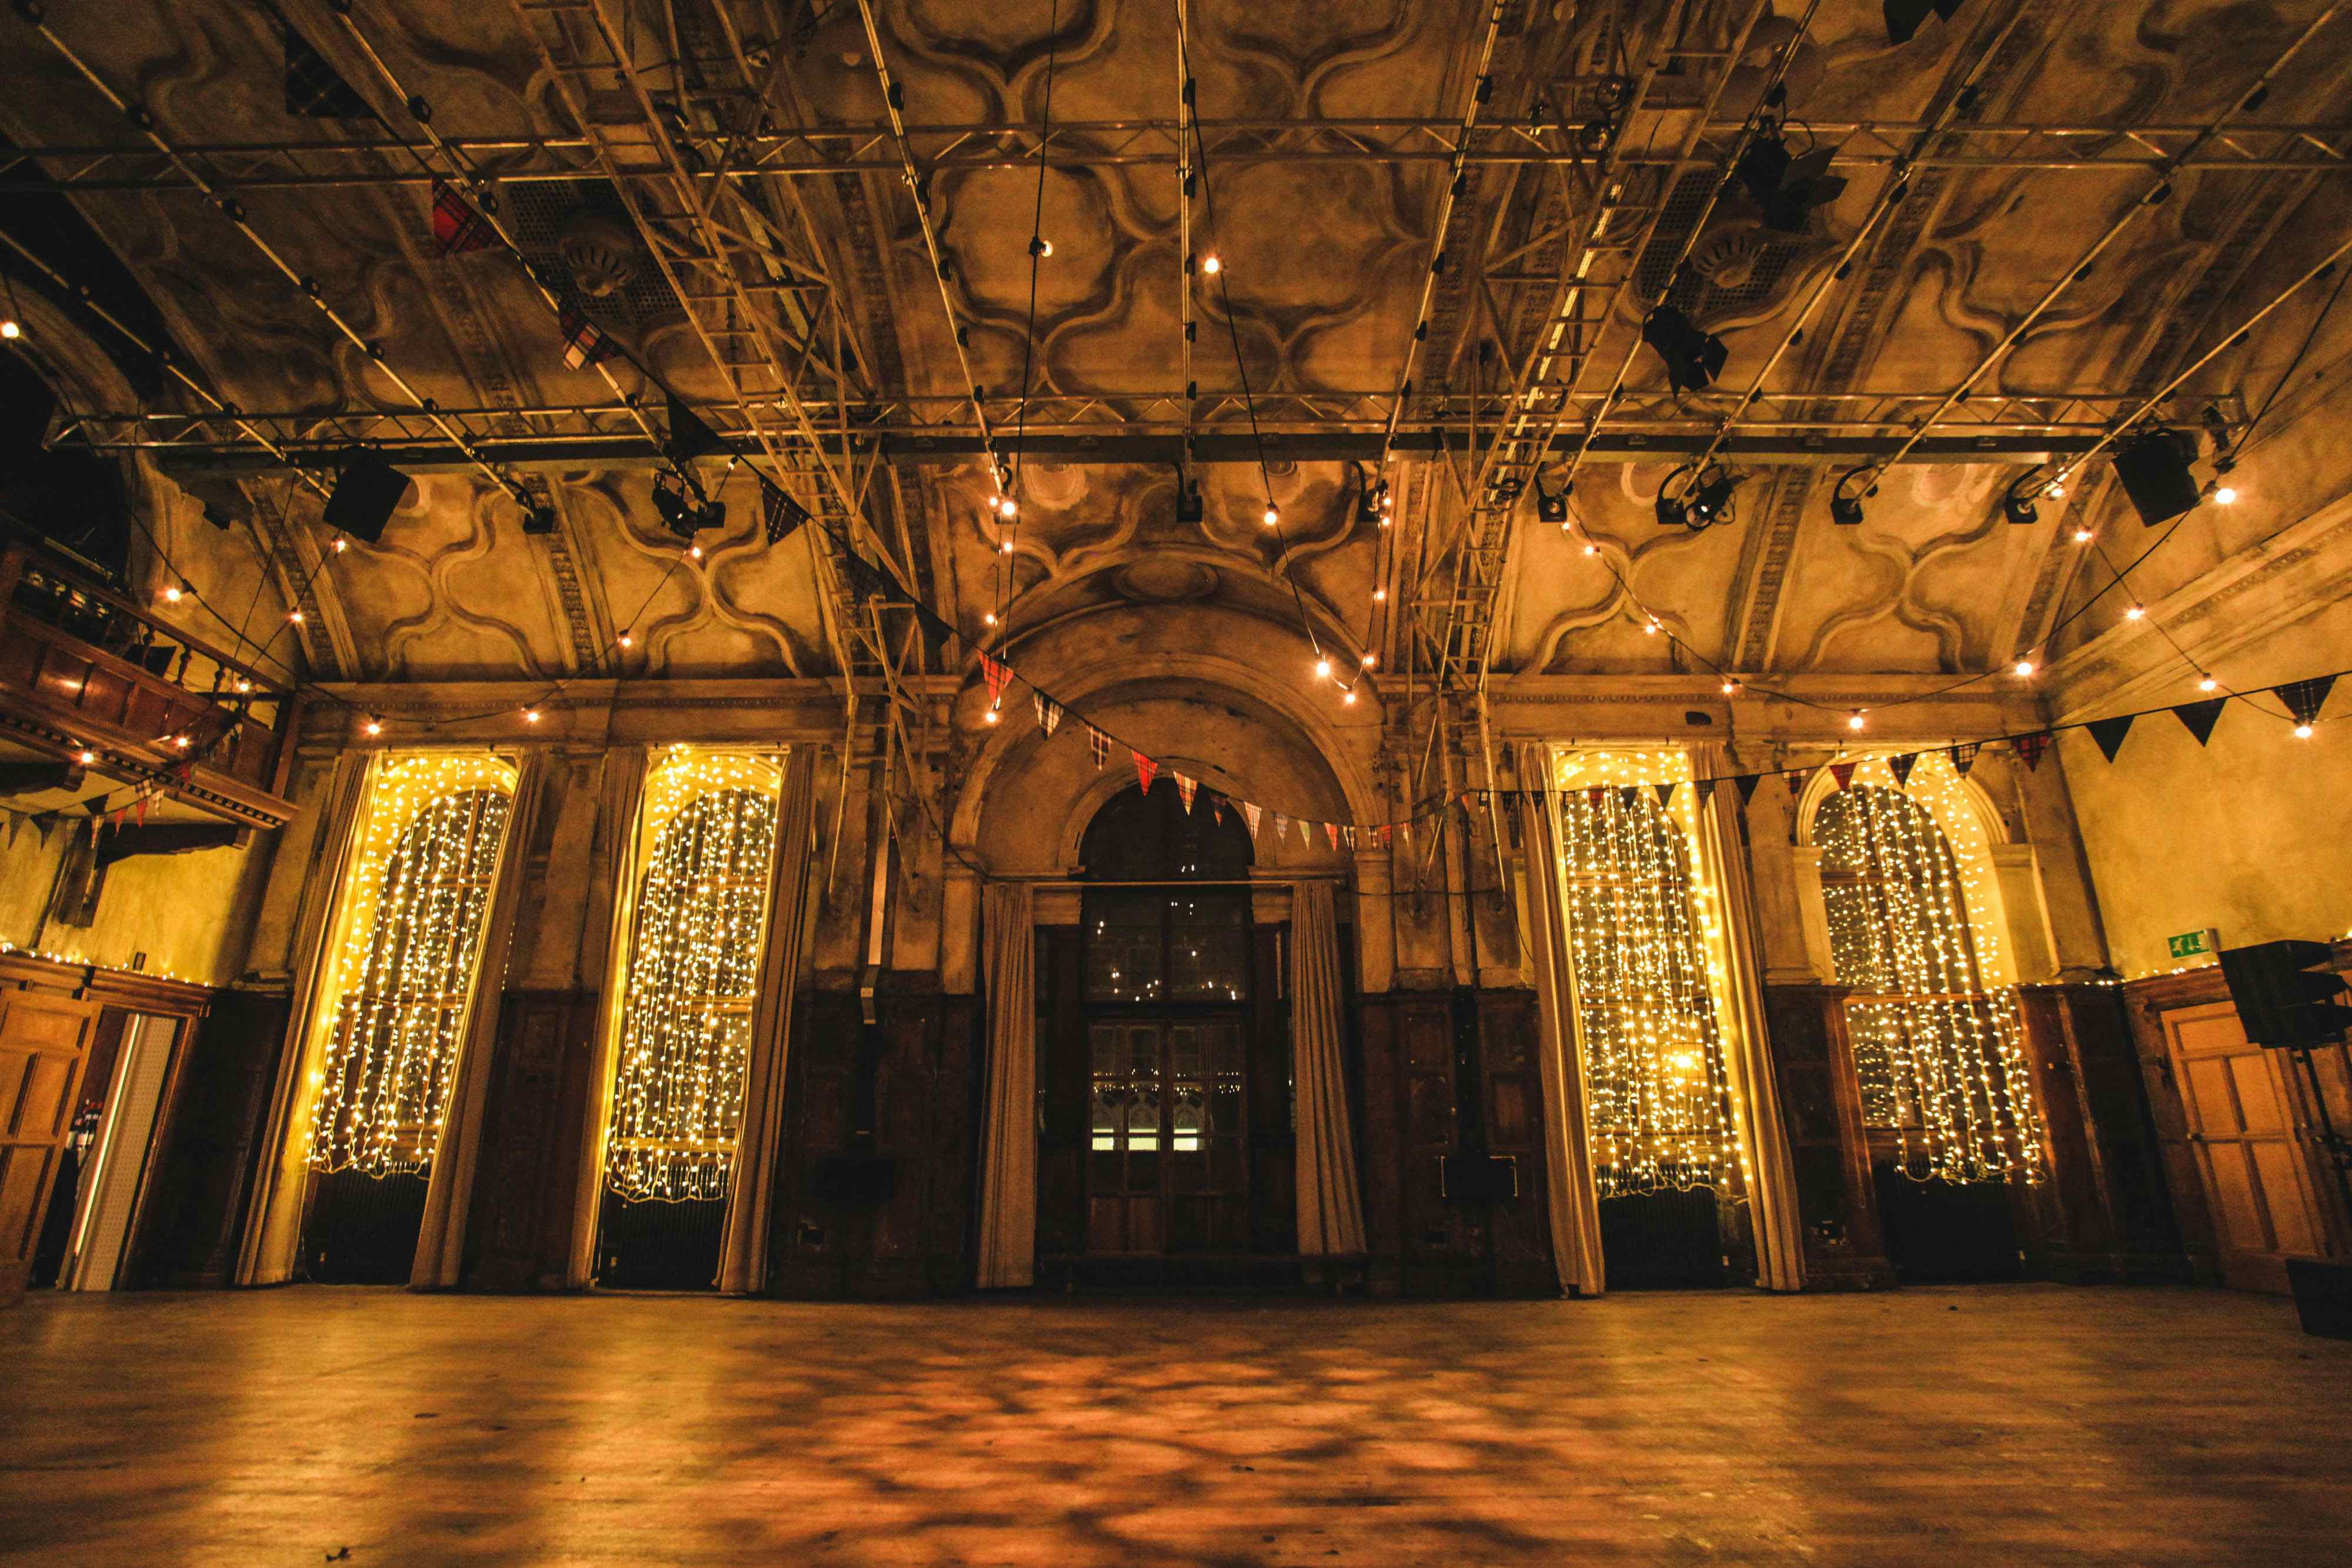 The Council Chamber, Battersea Arts Centre